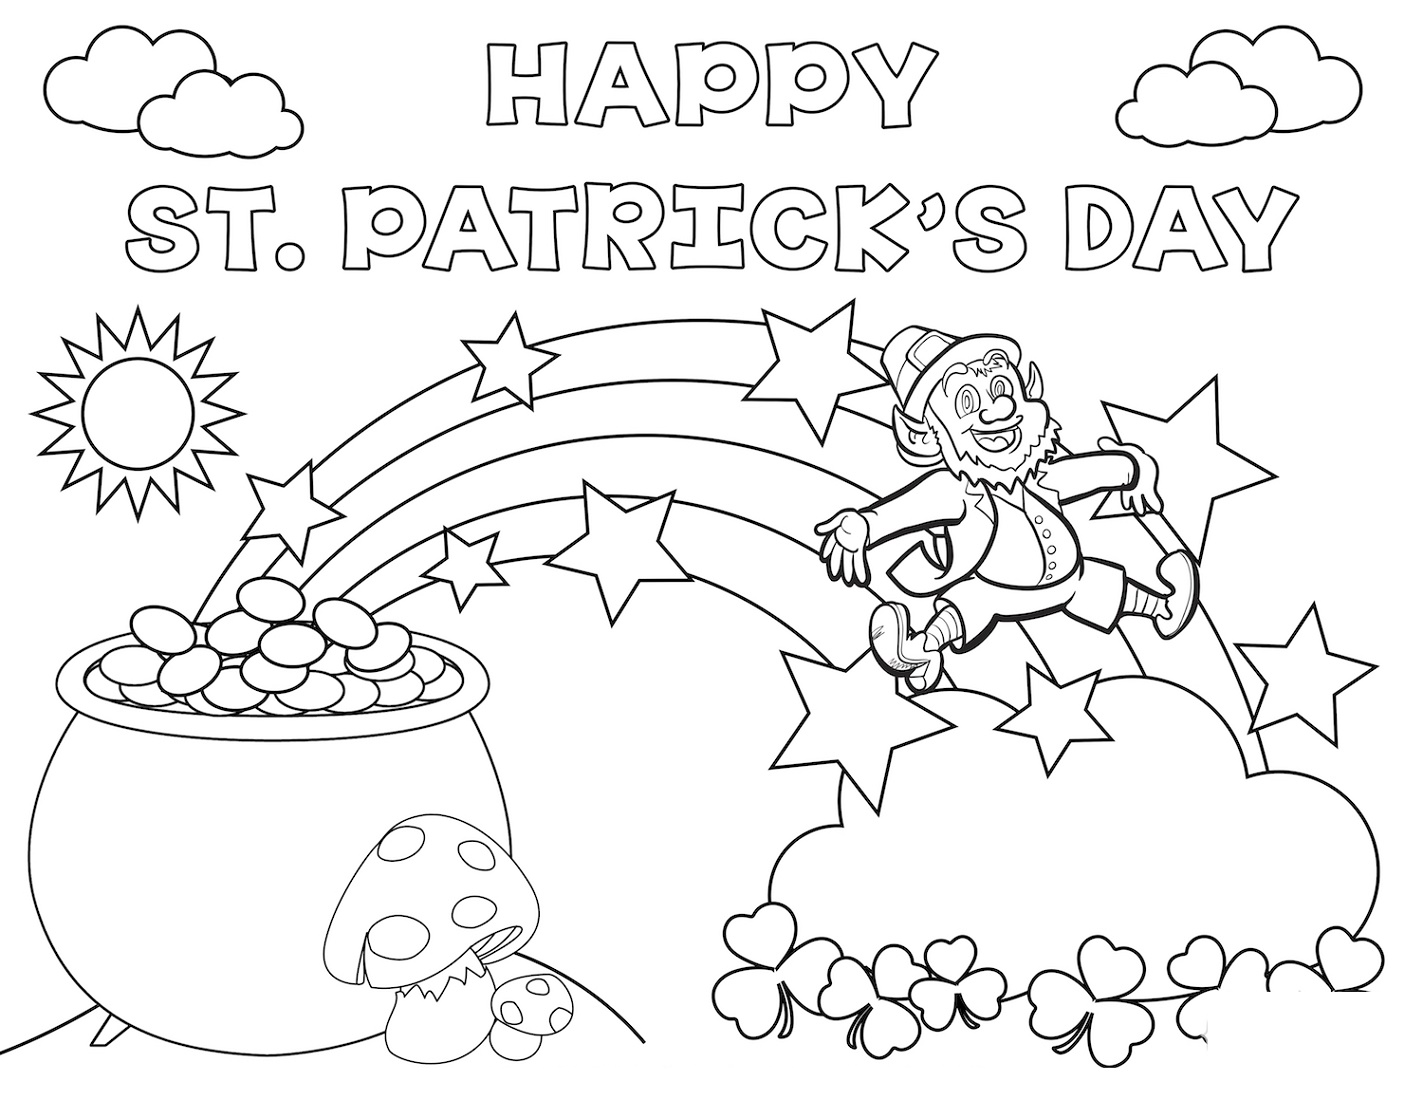 St Patrick's Day Coloring Pages For Kids